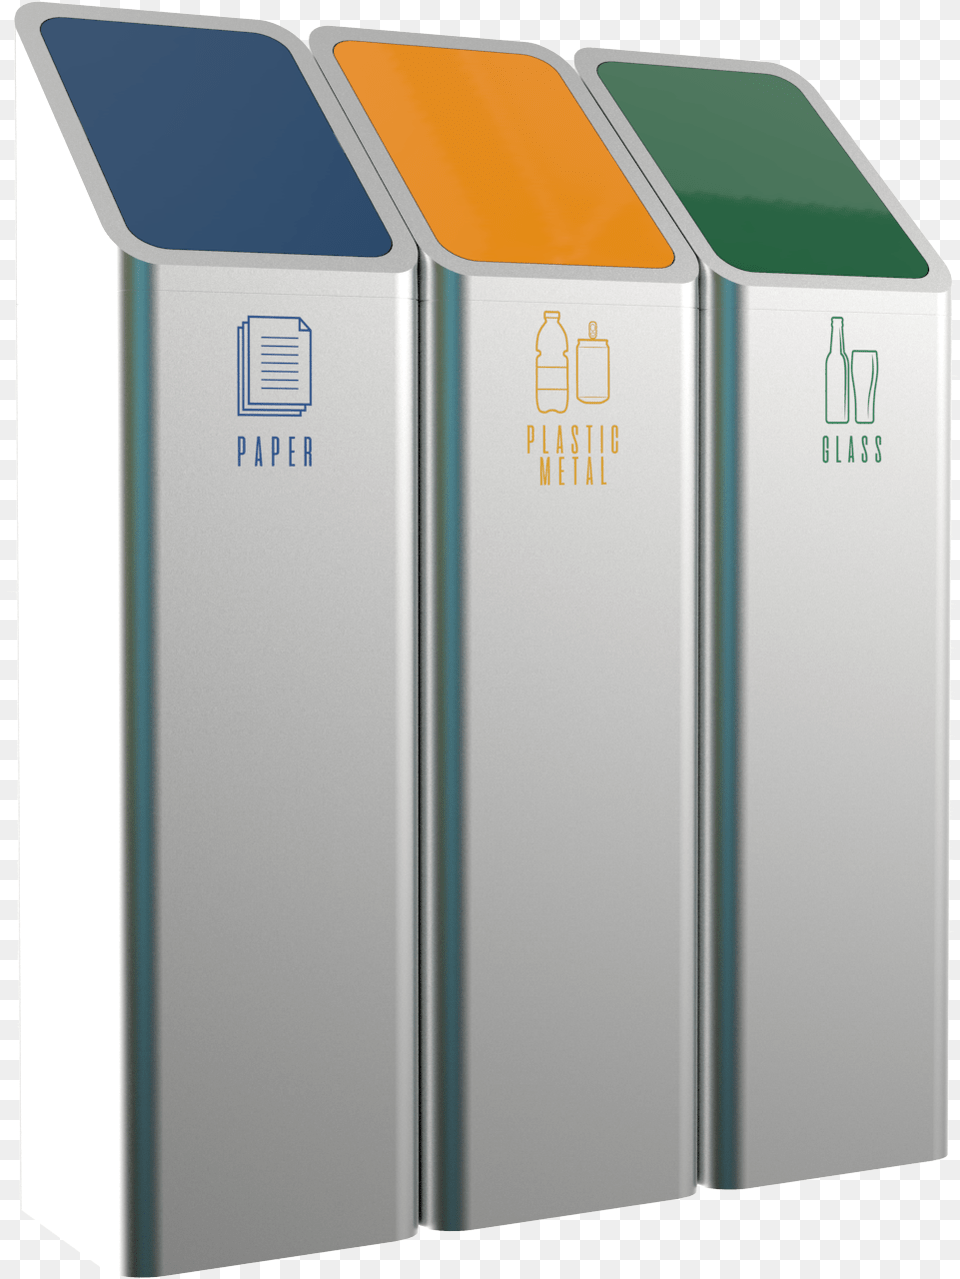 Stainless Steel Recycling Bins Plastic, Tin, Can Free Png